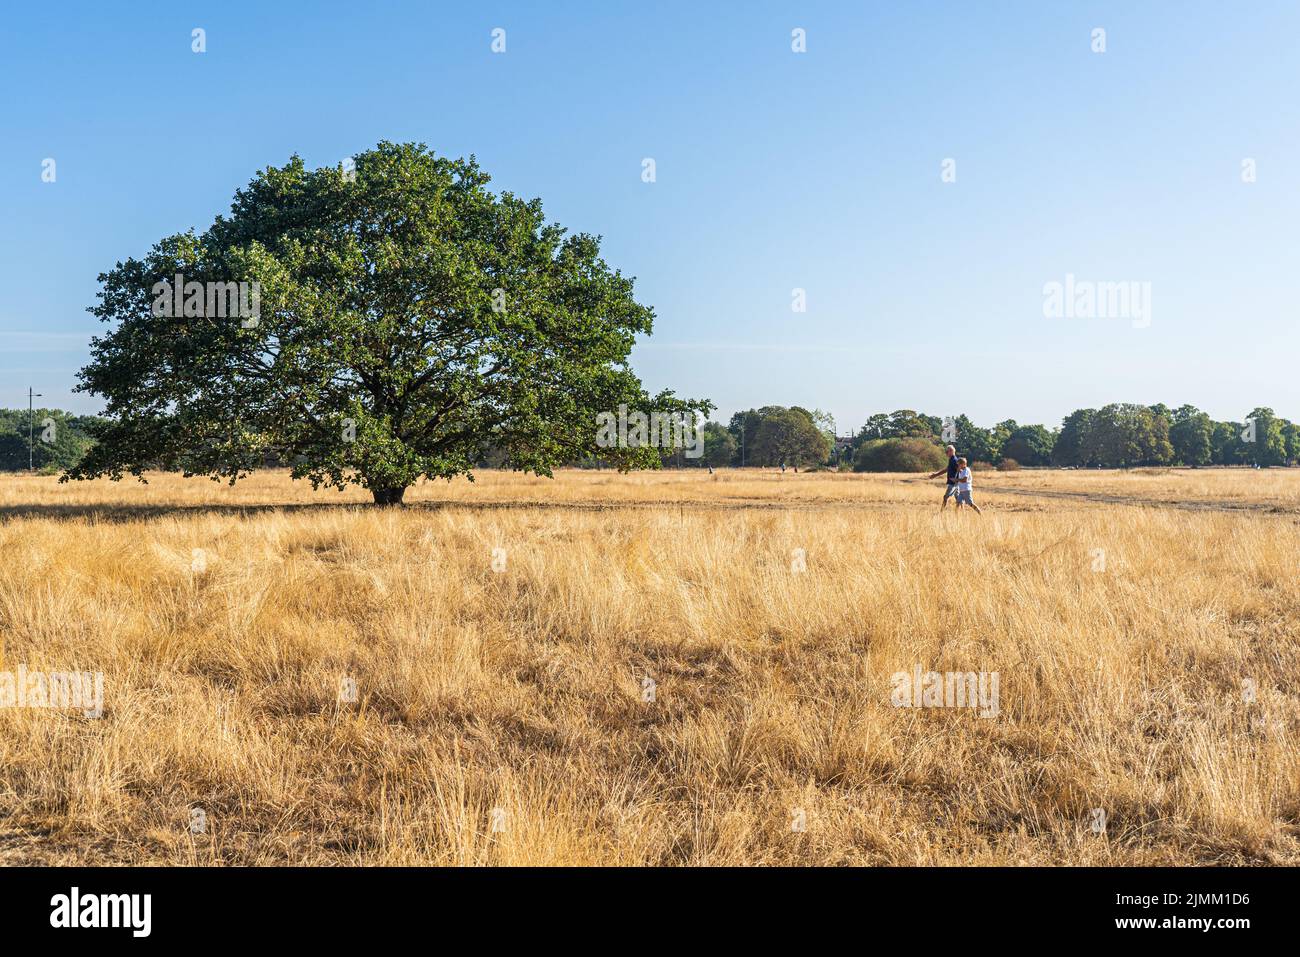 Wimbledon, London, UK. 7 August 2022  People walking on a bright morning  on the  parched  grass of Wimbledon Commo, south west London  as the hot weather and a lack of rainfall continue to grip much of the south of England and the UK, with temperatures expected to reach  above 30celsius  by next week Credit. amer ghazzal/Alamy Live News Stock Photo